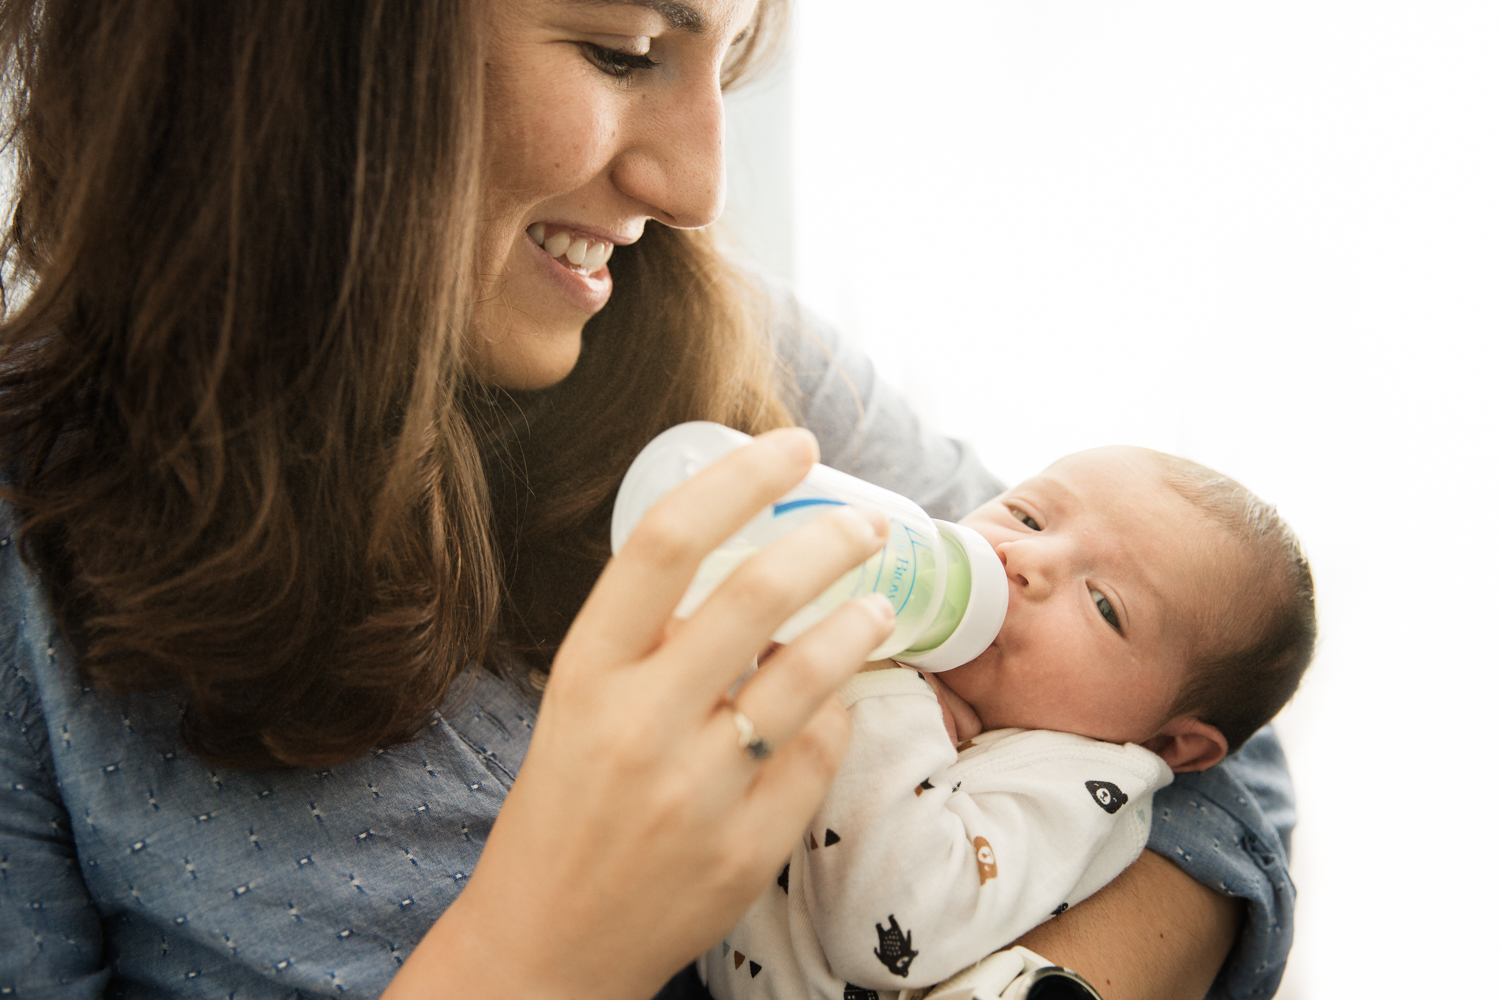 young smiling mother feeds infant daughter a bottle